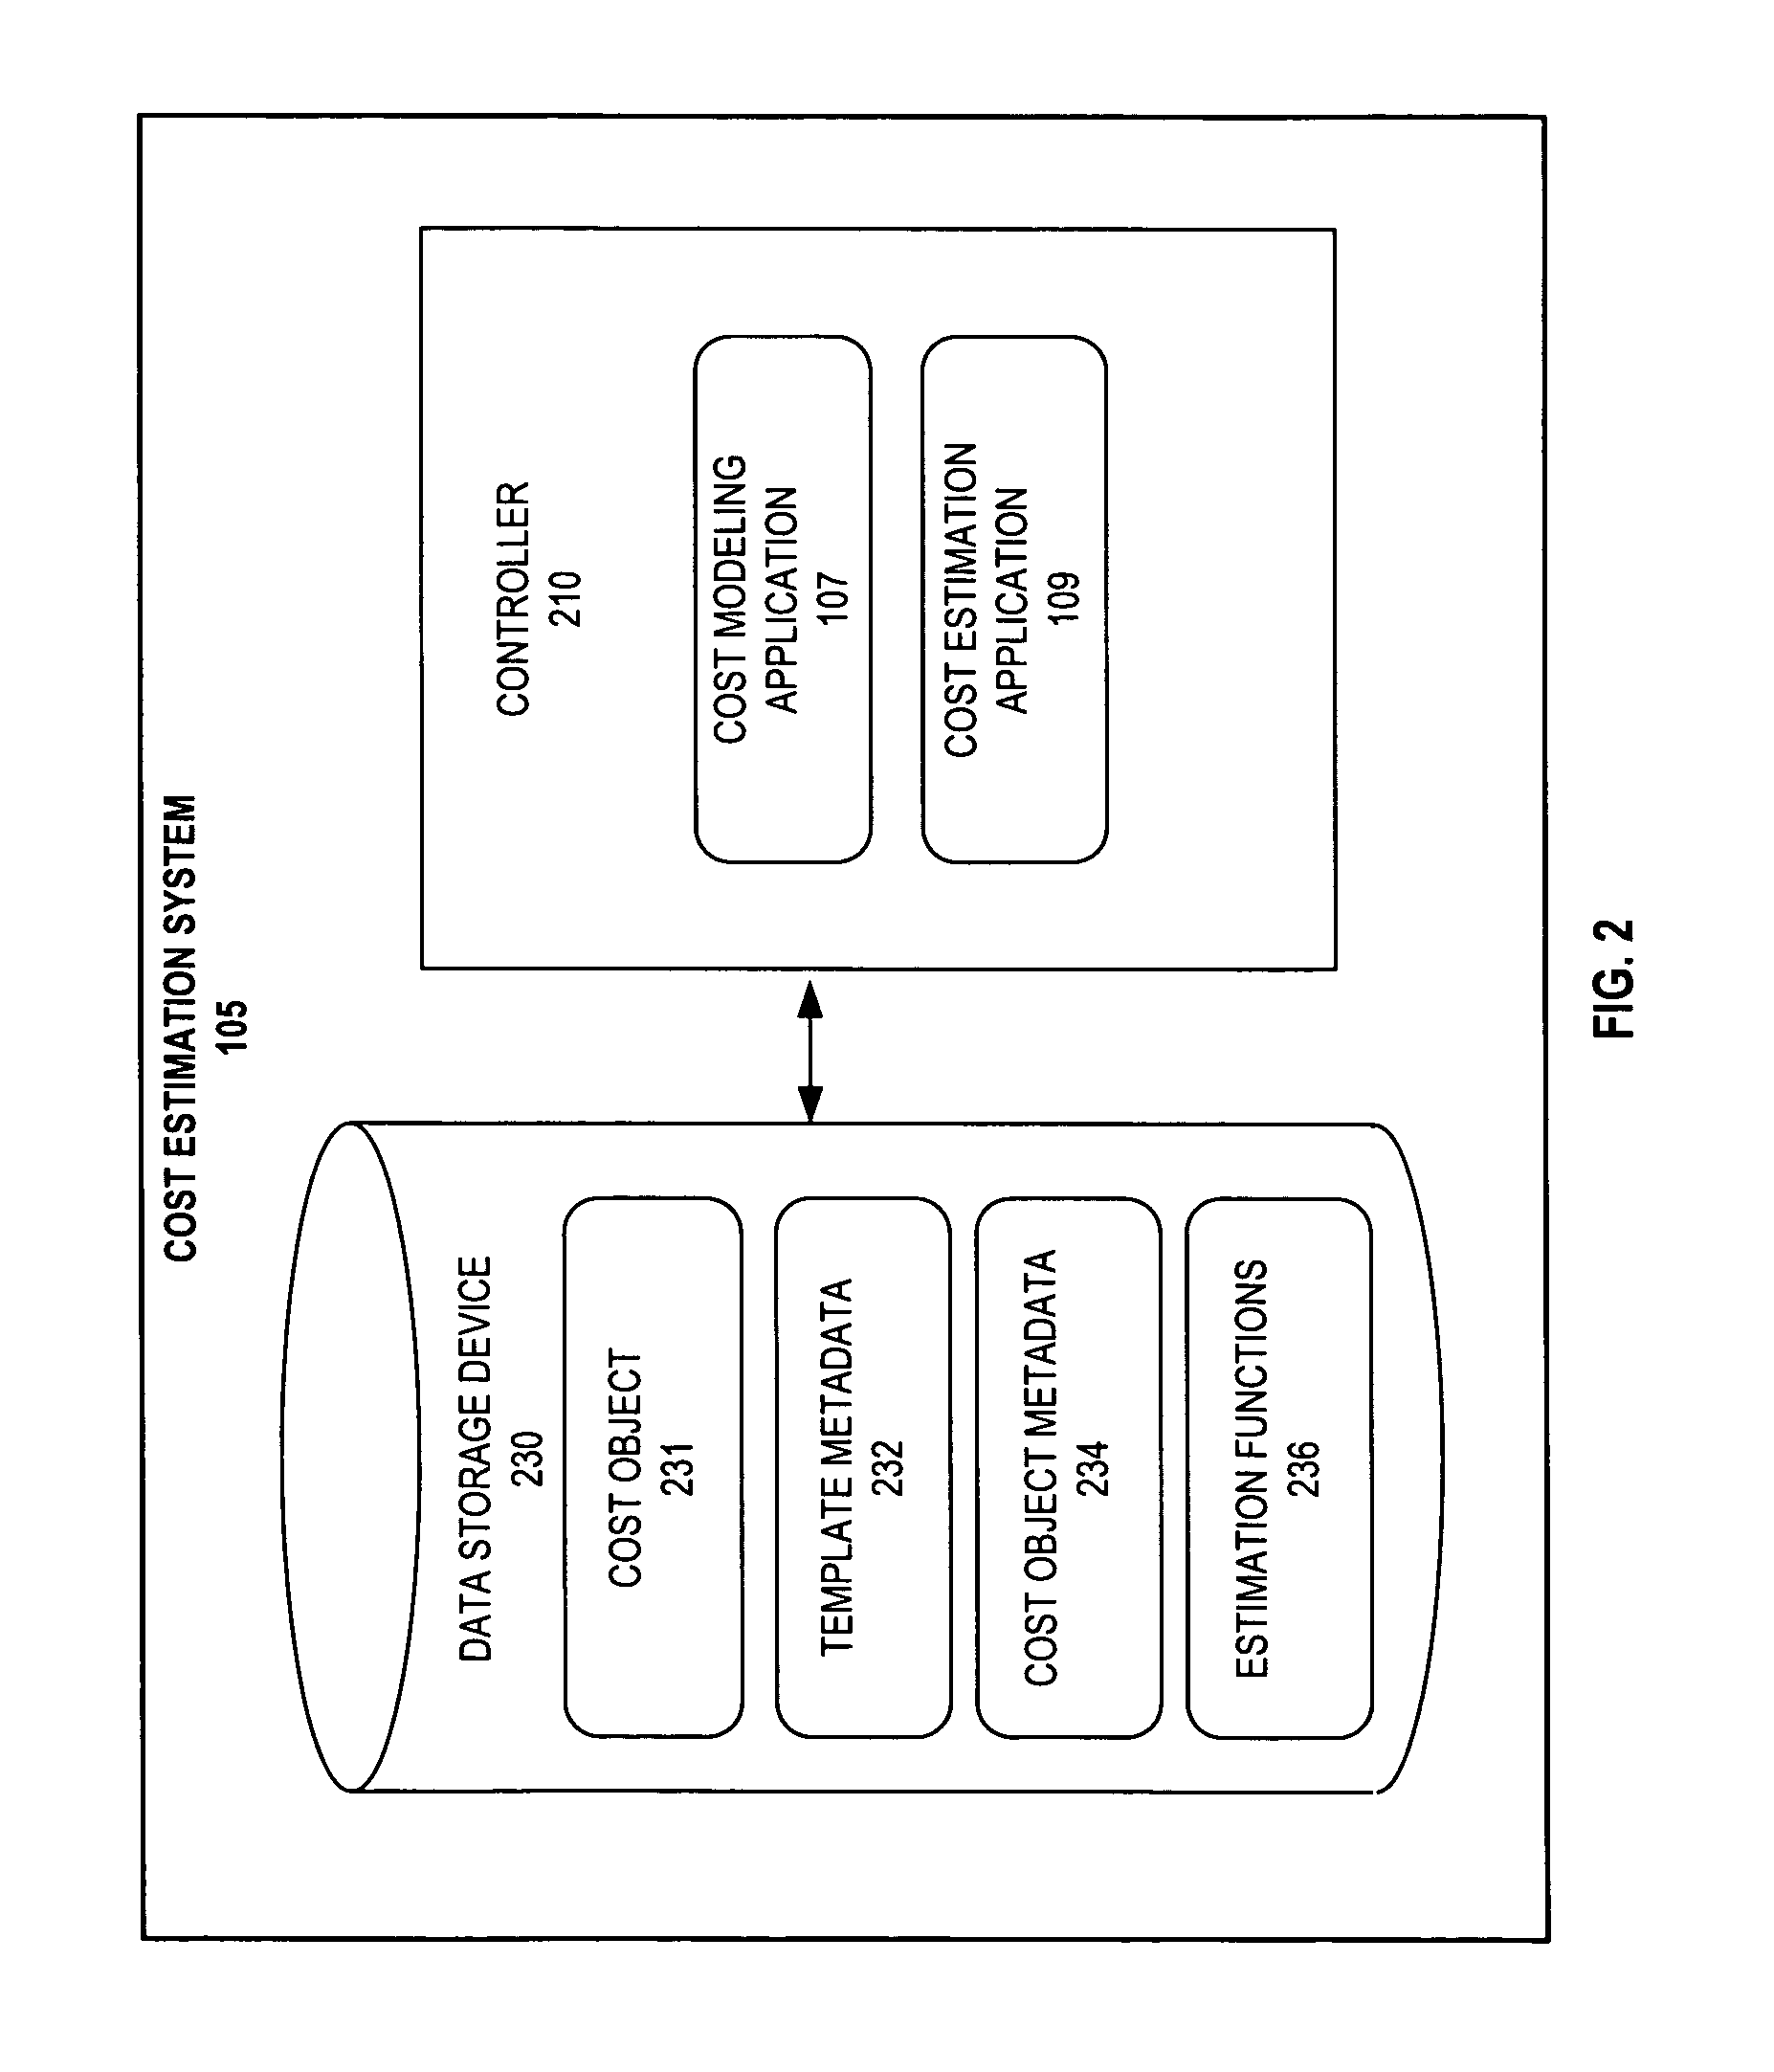 Methods and systems for cost estimation based on templates